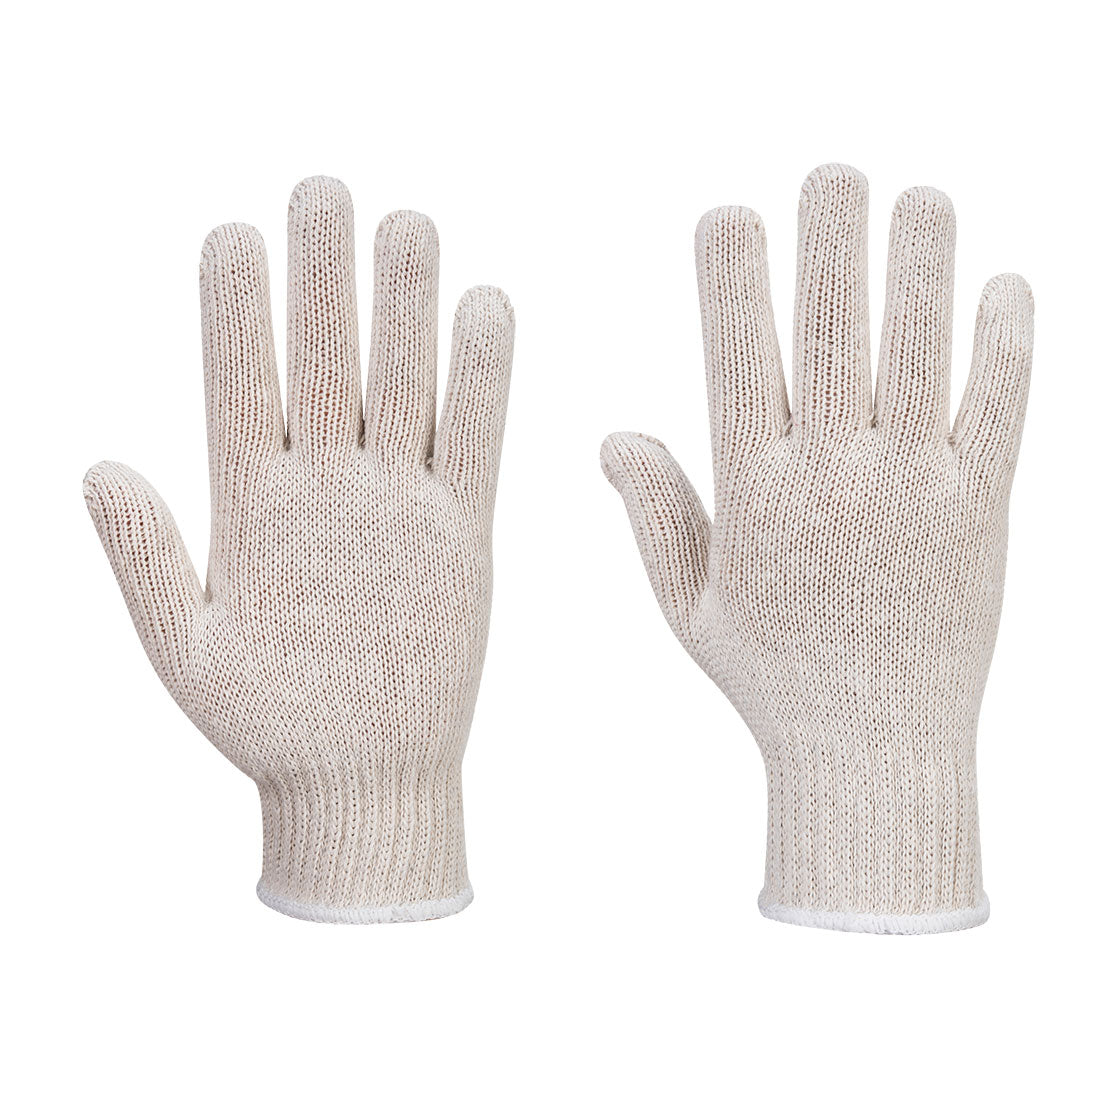 Portwest AB030 String Knit Liner Glove (288 Pairs) for General Handling